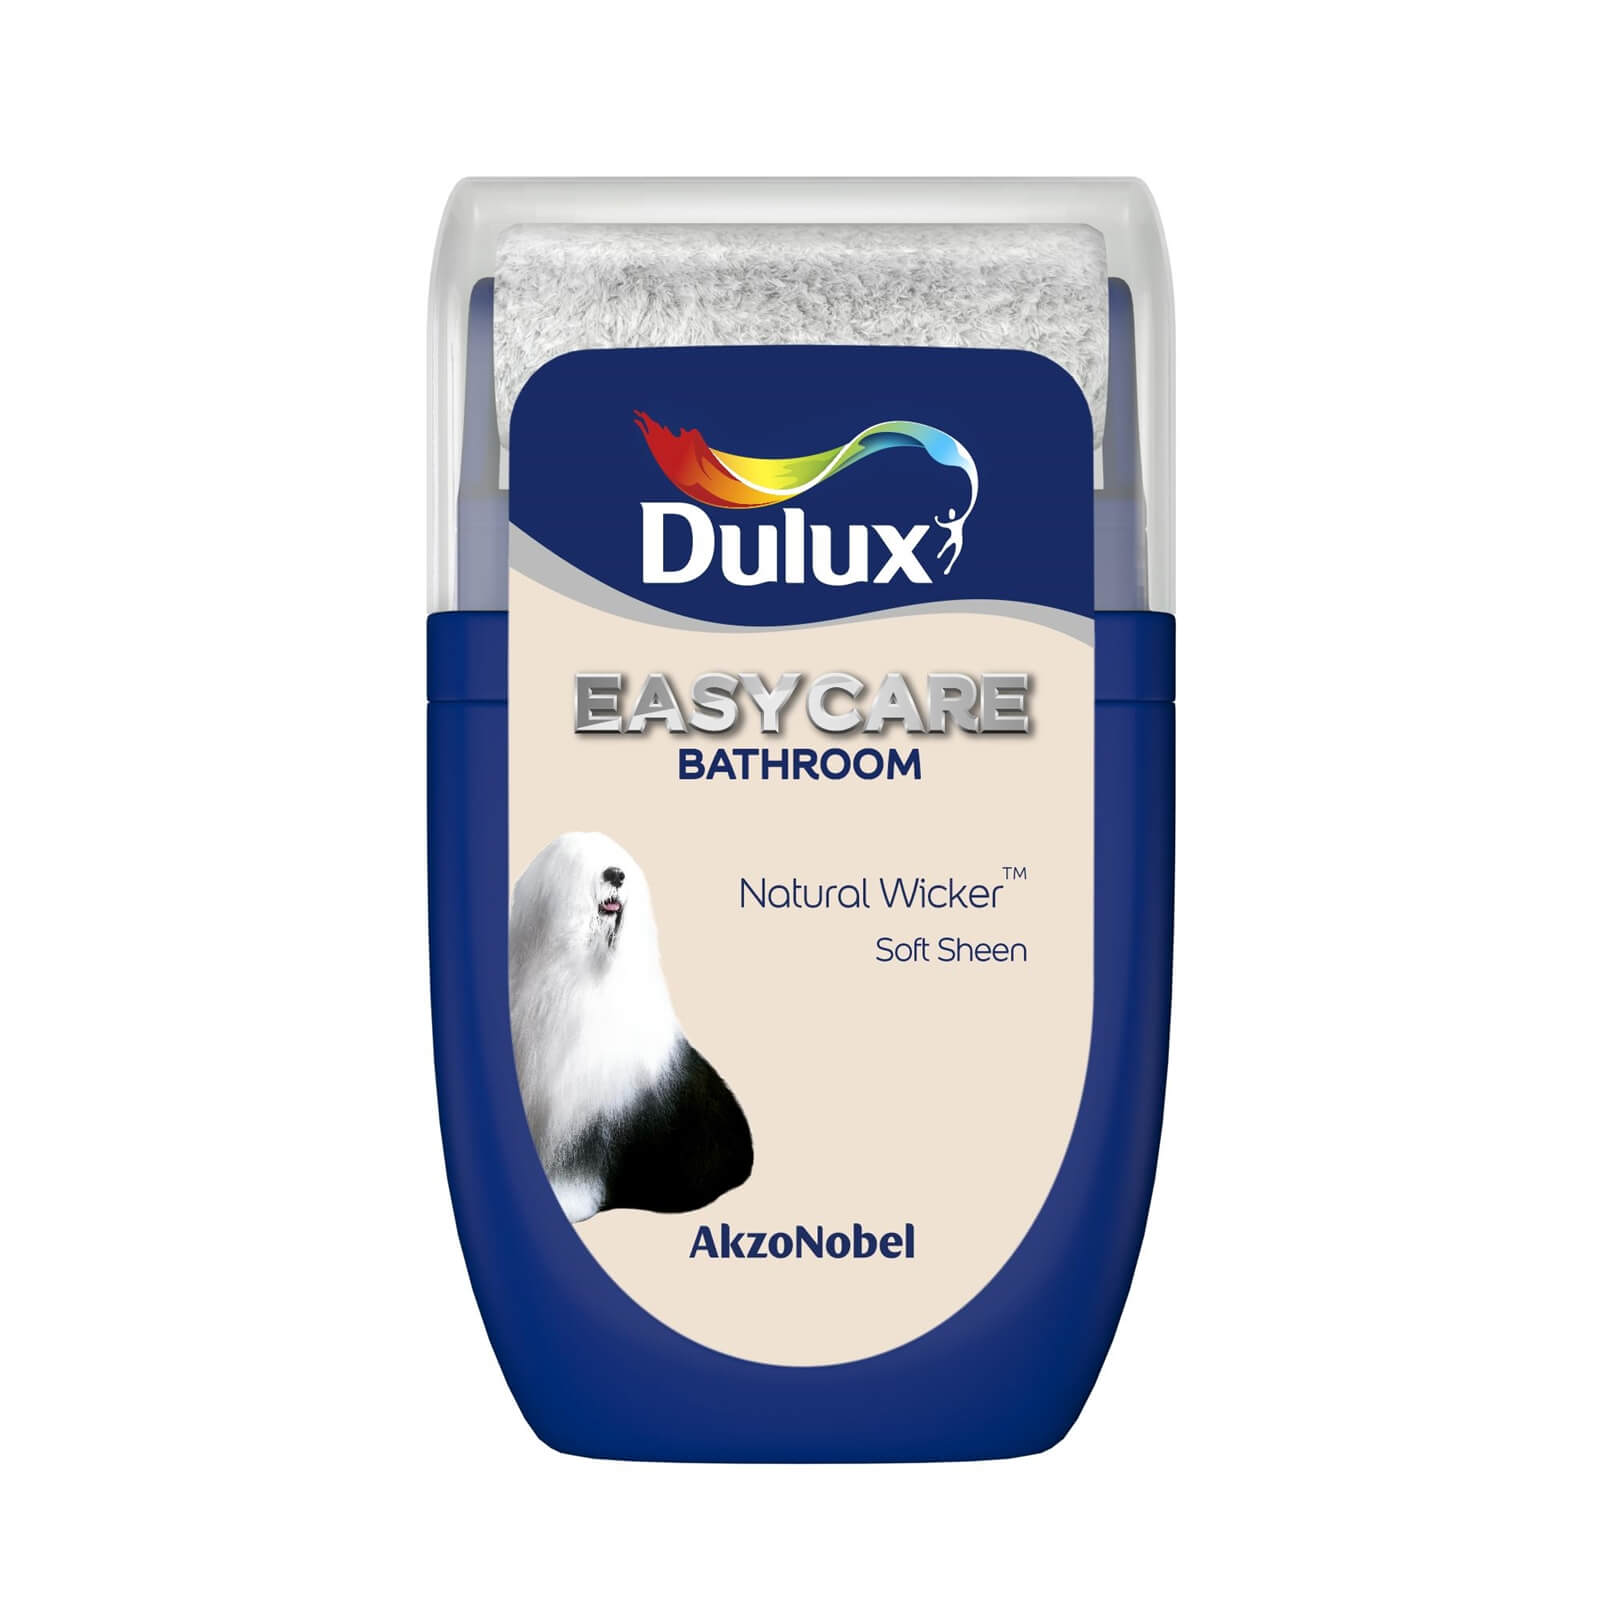 Dulux Easycare Bathroom Natural Wicker Tester Paint - 30ml